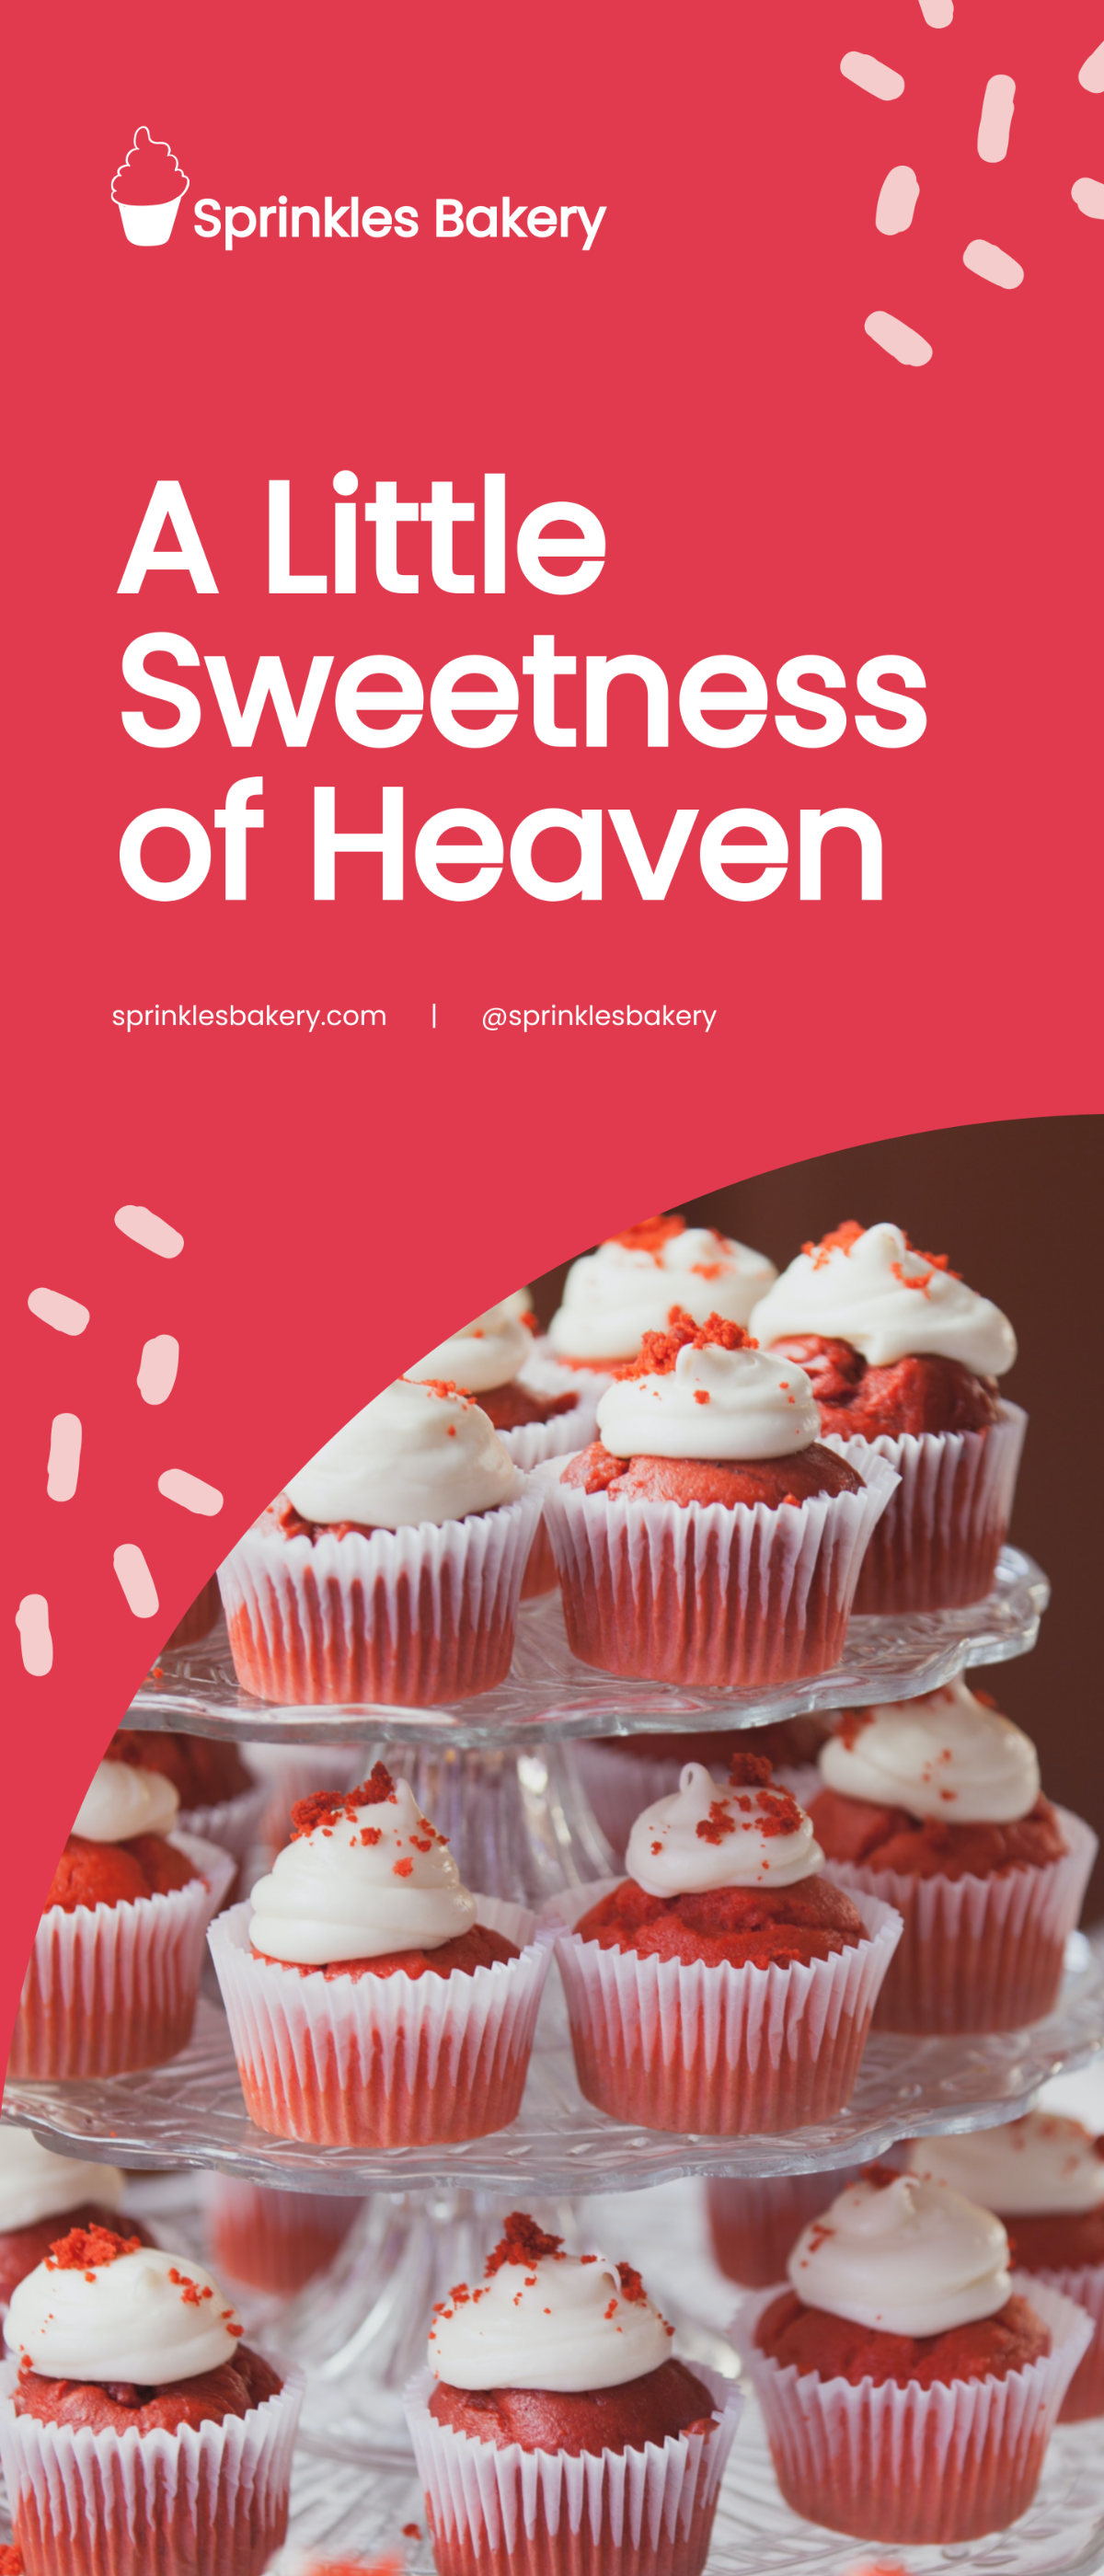 Cupcake Rollup Banner